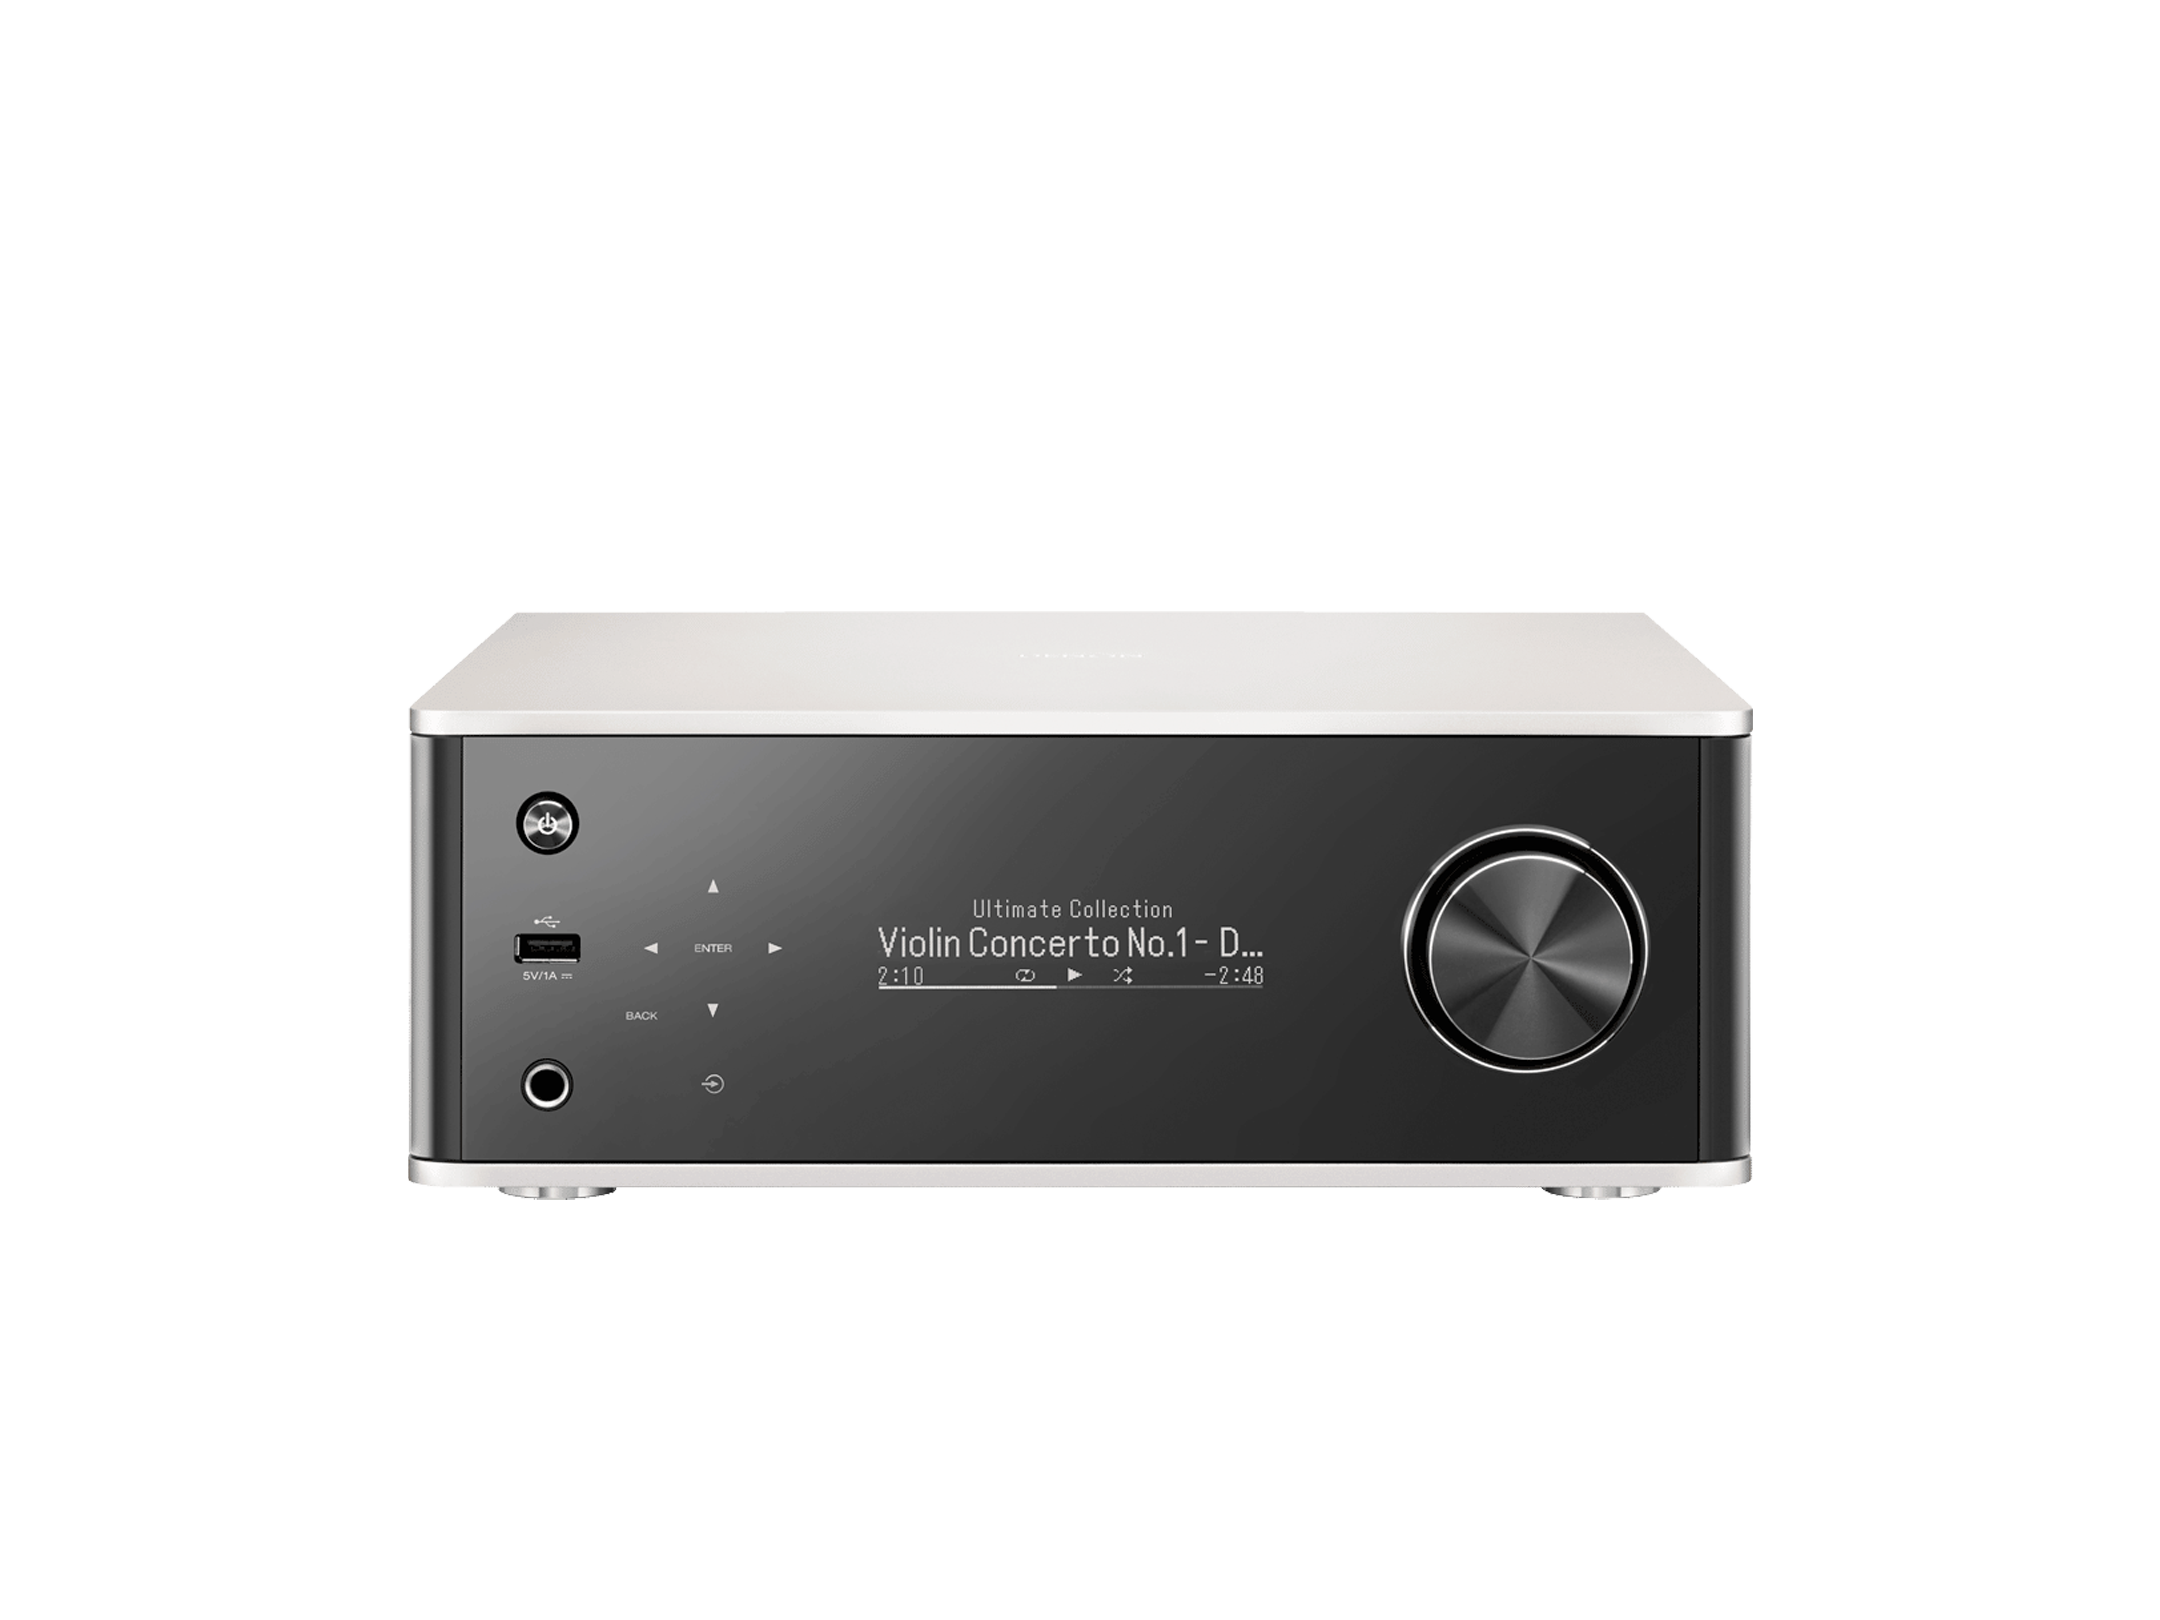 PMA-150H - Integrated Network Amplifier with 70W Power per Channel 